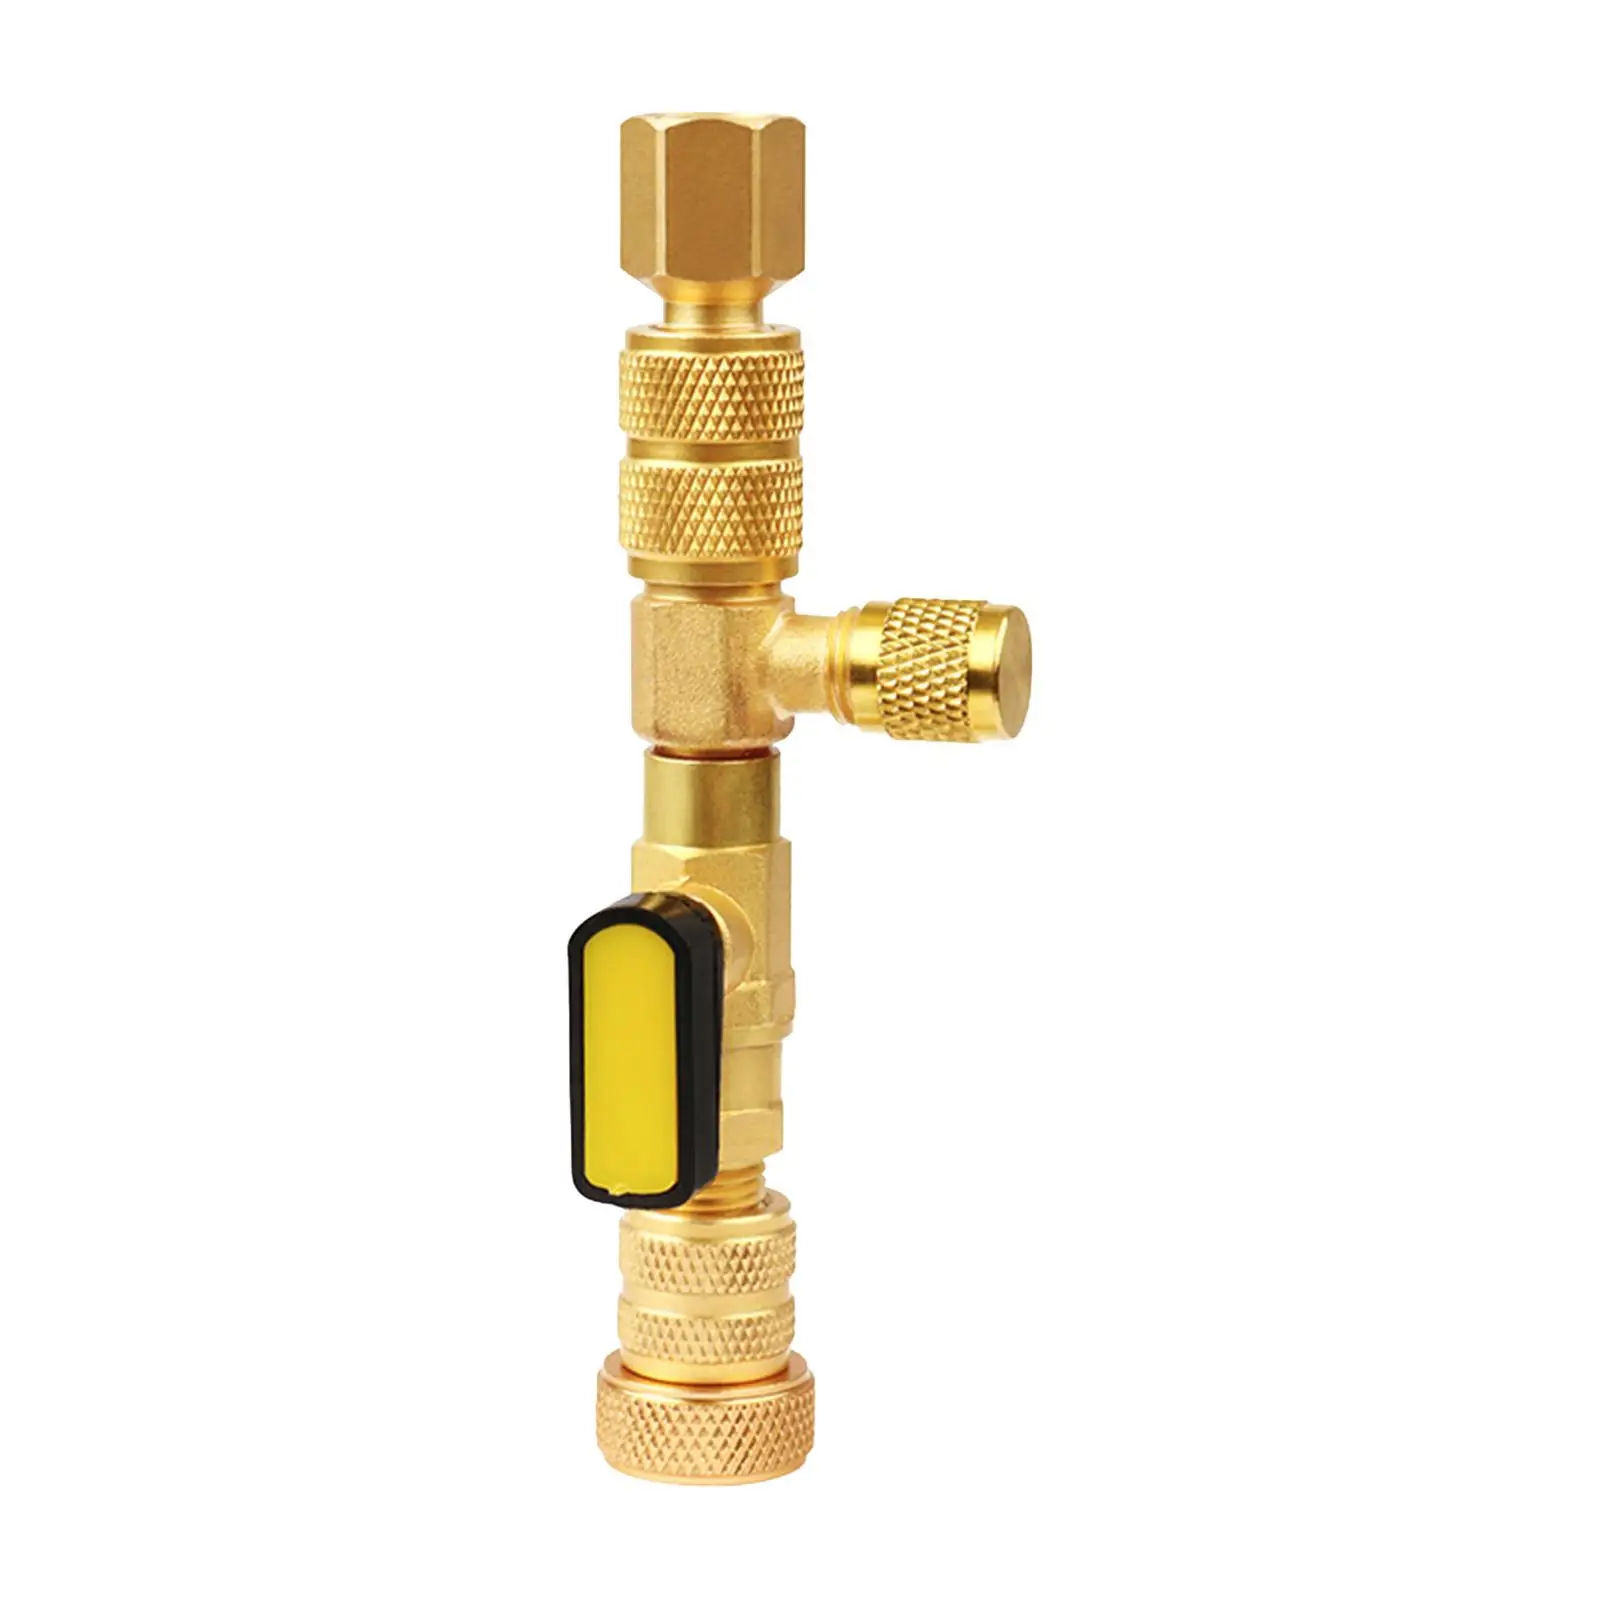 Valve Core Remover Installer Universal Durable Valve Core Changer Air Conditioning Repair Tools Removal Tool Installer